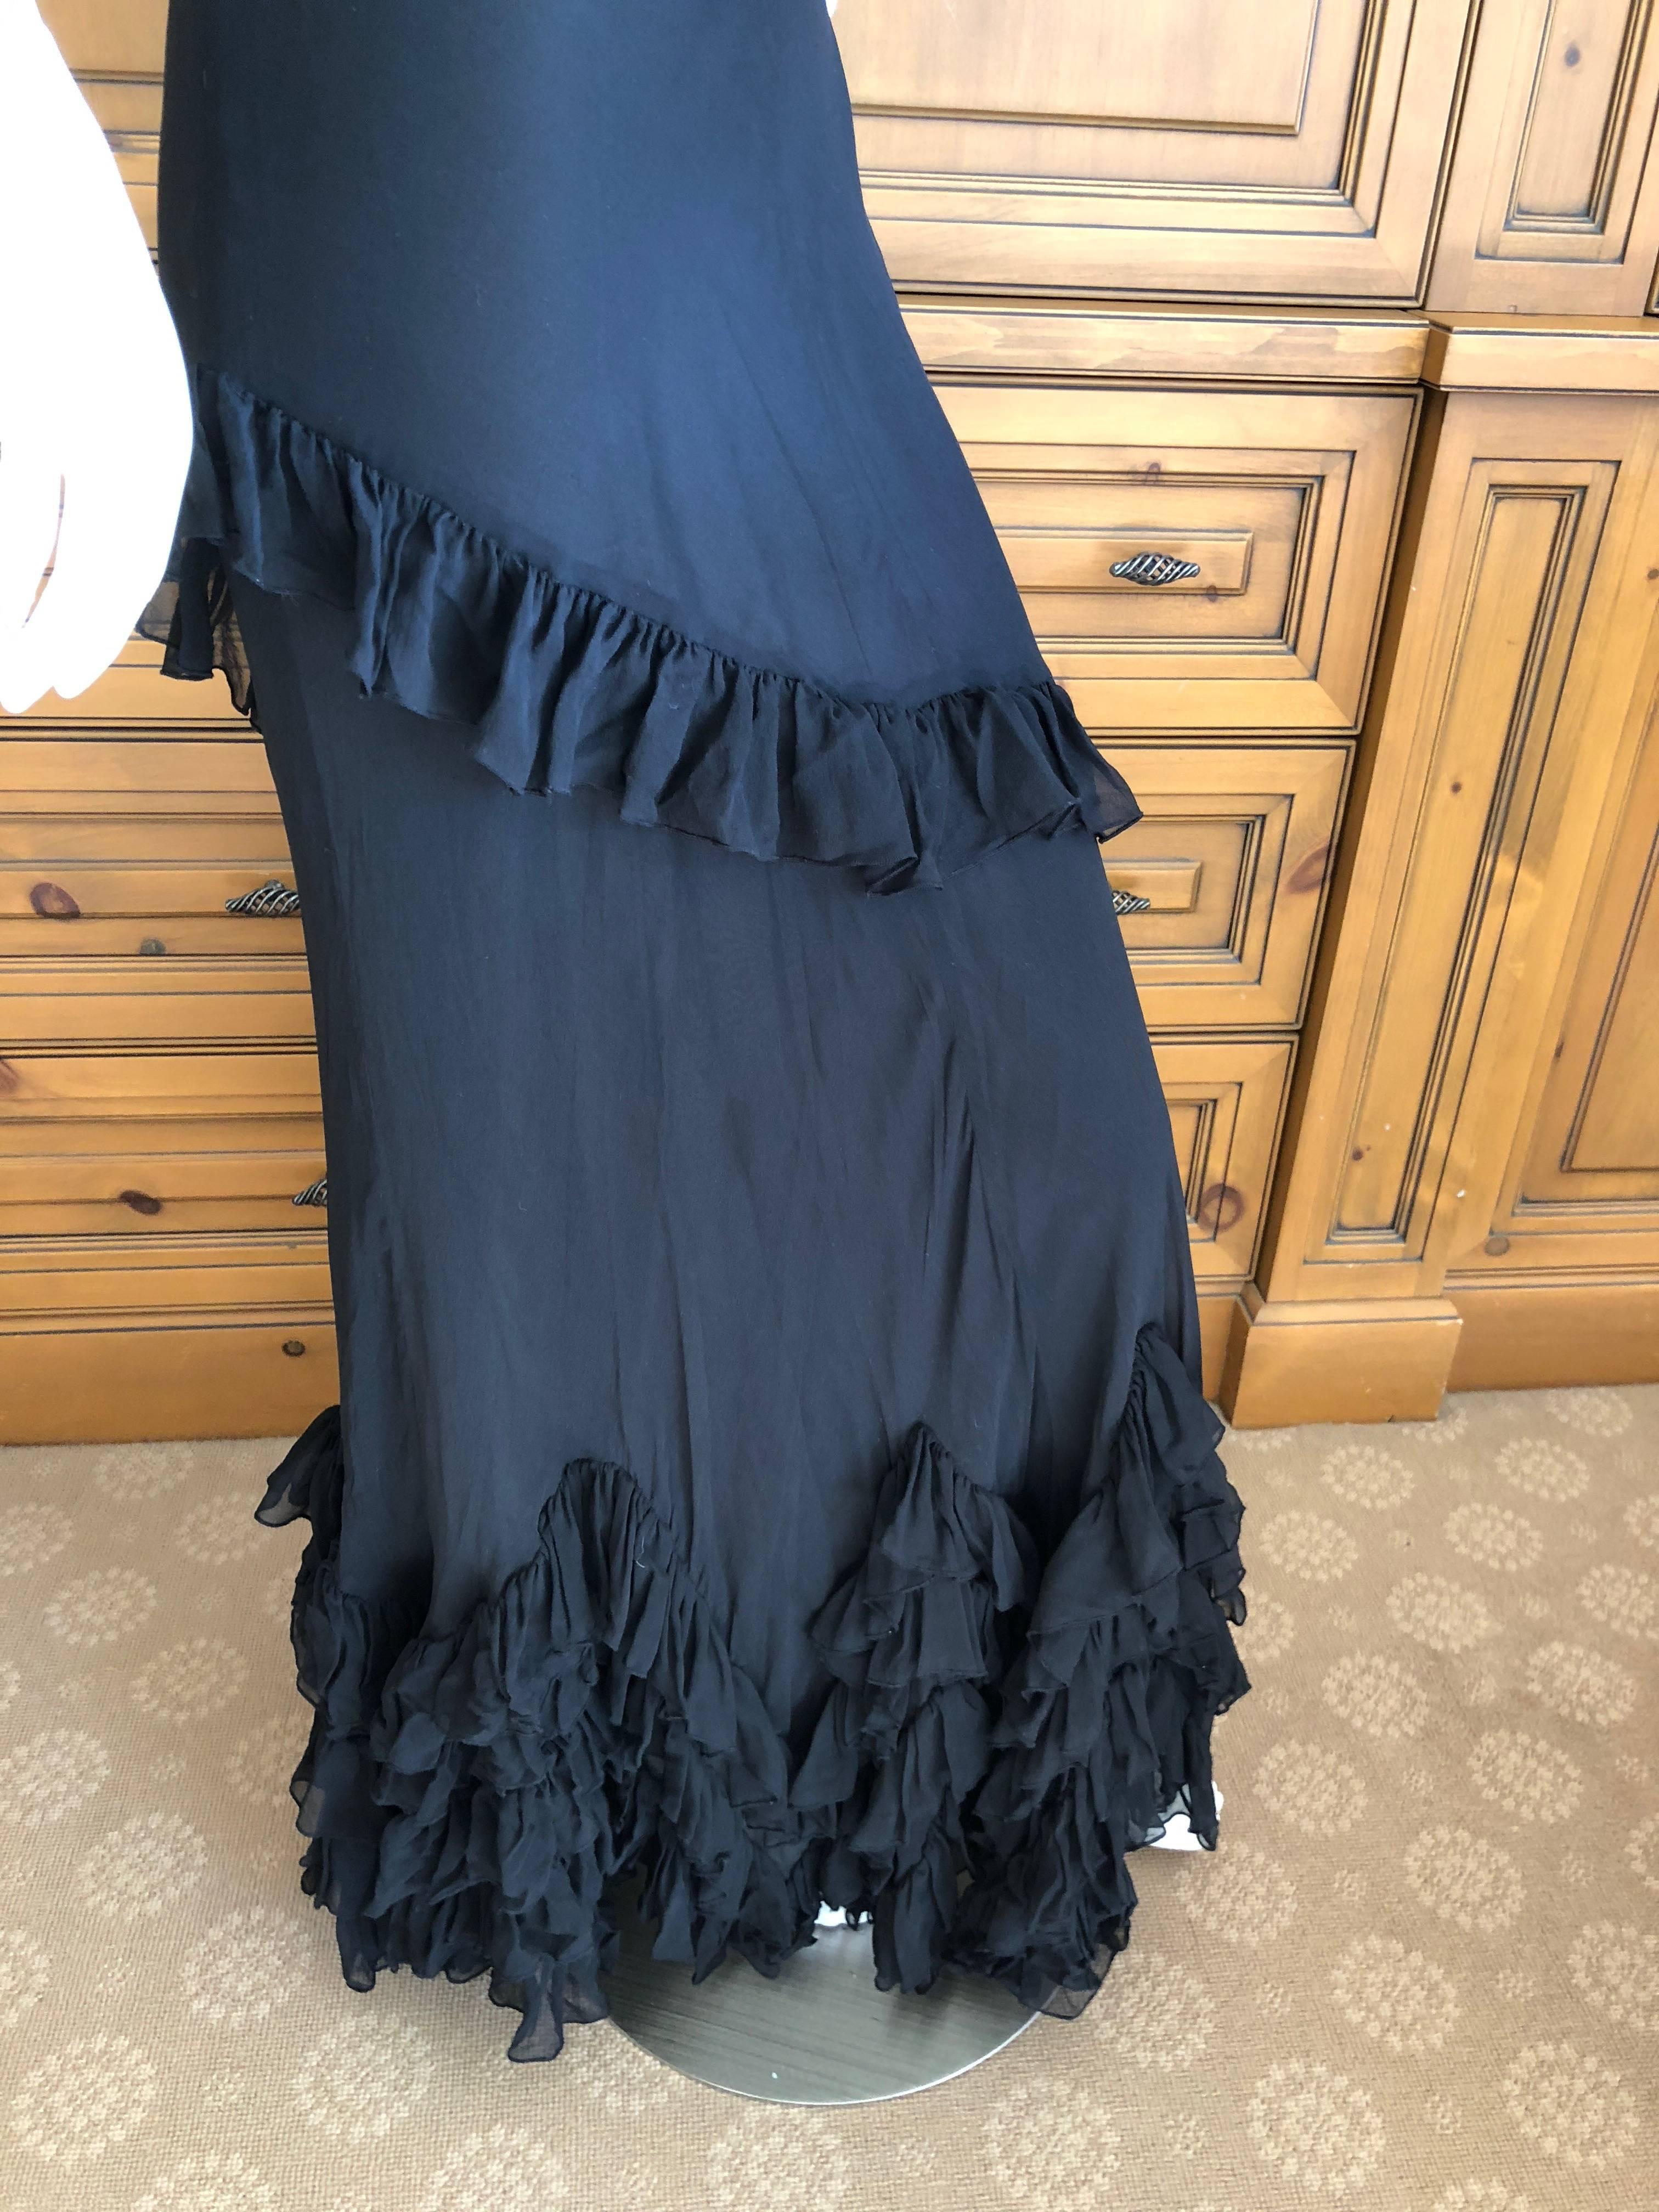  John Galliano Black Sheer Vintage Silk Ruffled Evening Dress with Cowl Back 
Size 38
 Bust 36